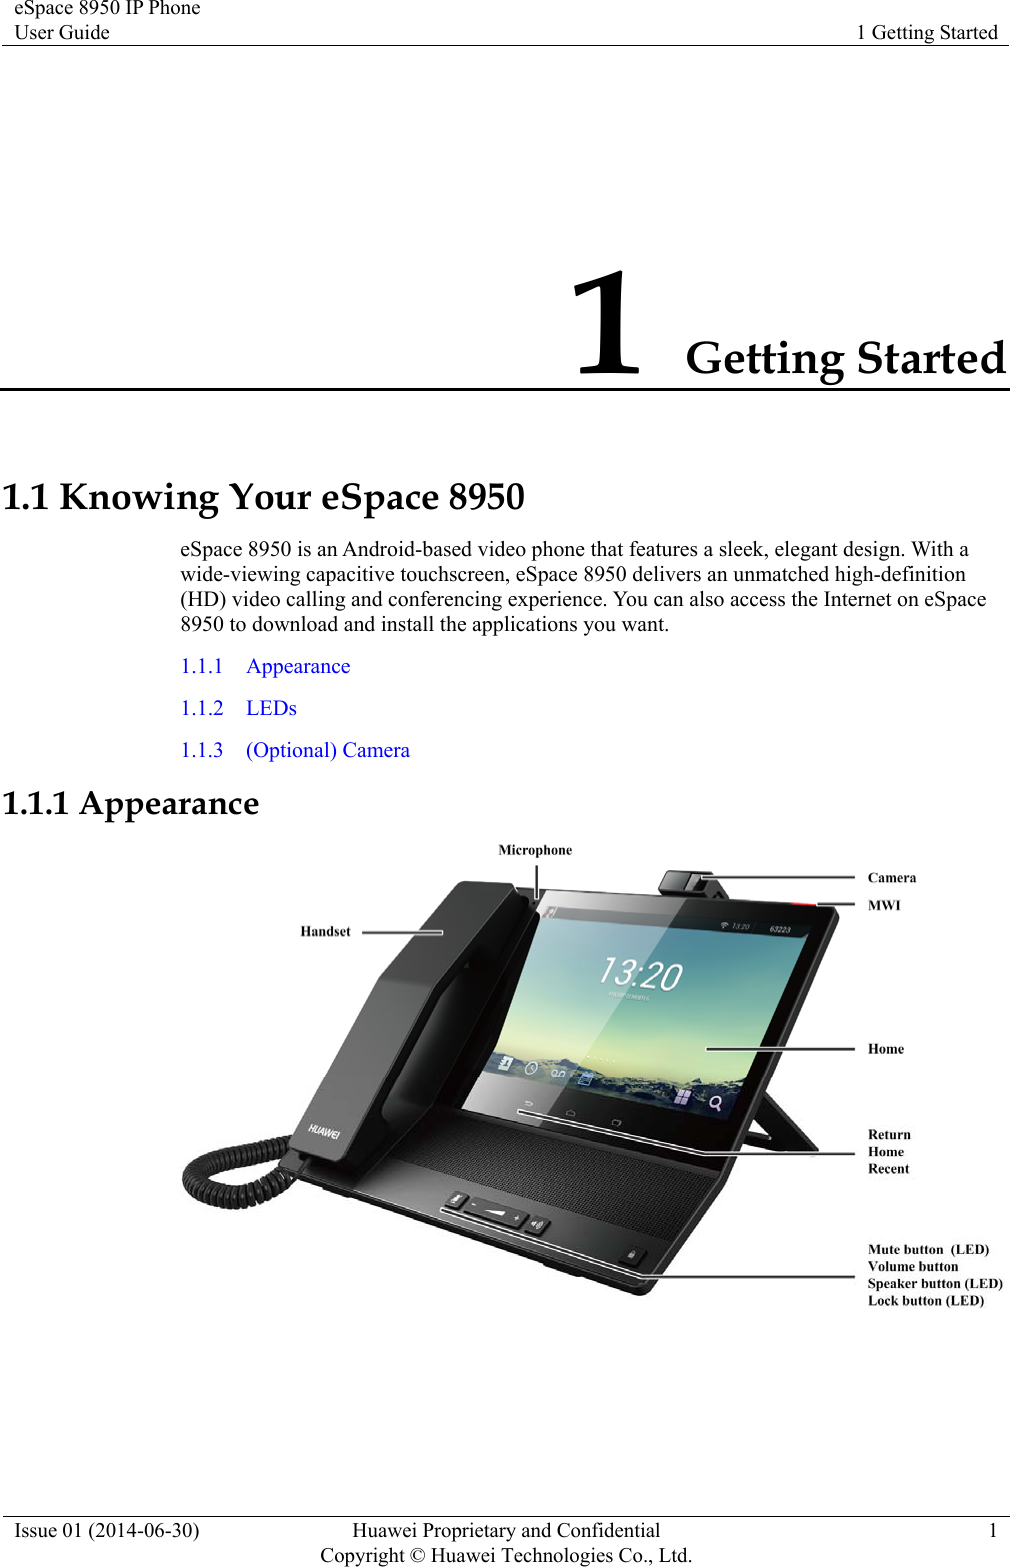 eSpace 8950 IP Phone User Guide  1 Getting Started Issue 01 (2014-06-30)  Huawei Proprietary and Confidential         Copyright © Huawei Technologies Co., Ltd.1 1 Getting Started 1.1 Knowing Your eSpace 8950 eSpace 8950 is an Android-based video phone that features a sleek, elegant design. With a wide-viewing capacitive touchscreen, eSpace 8950 delivers an unmatched high-definition (HD) video calling and conferencing experience. You can also access the Internet on eSpace 8950 to download and install the applications you want. 1.1.1  Appearance 1.1.2  LEDs 1.1.3  (Optional) Camera 1.1.1 Appearance   